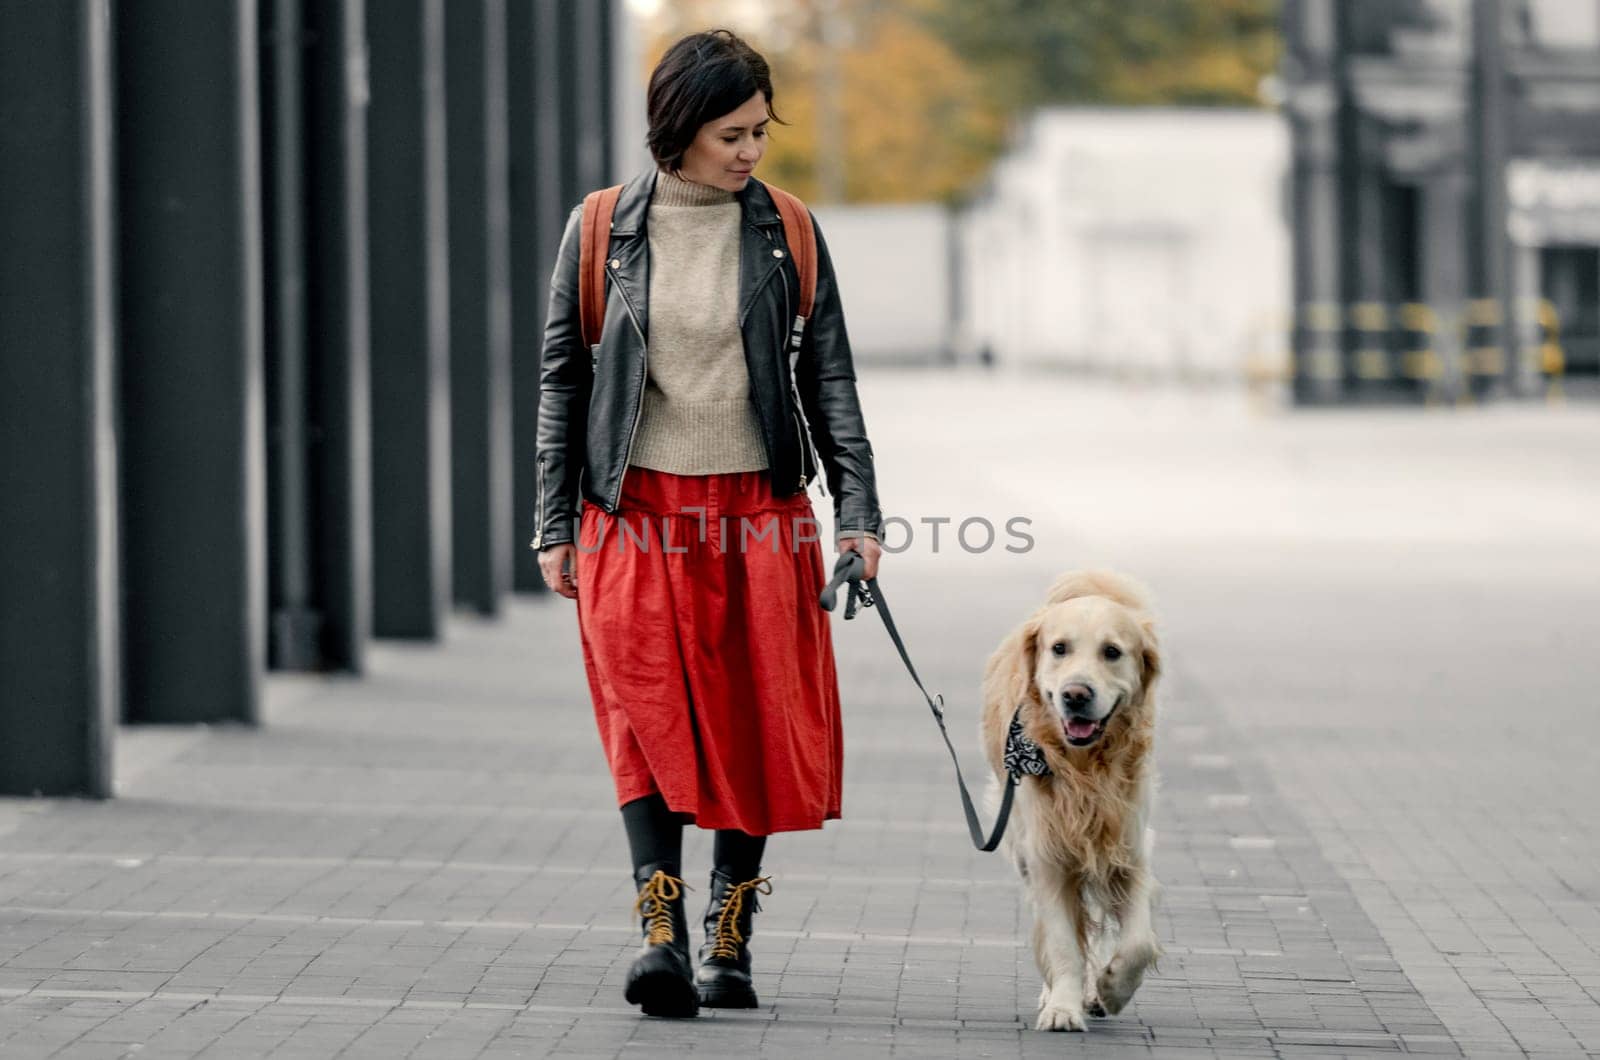 Young woman walking down the street with her golden retriever dog